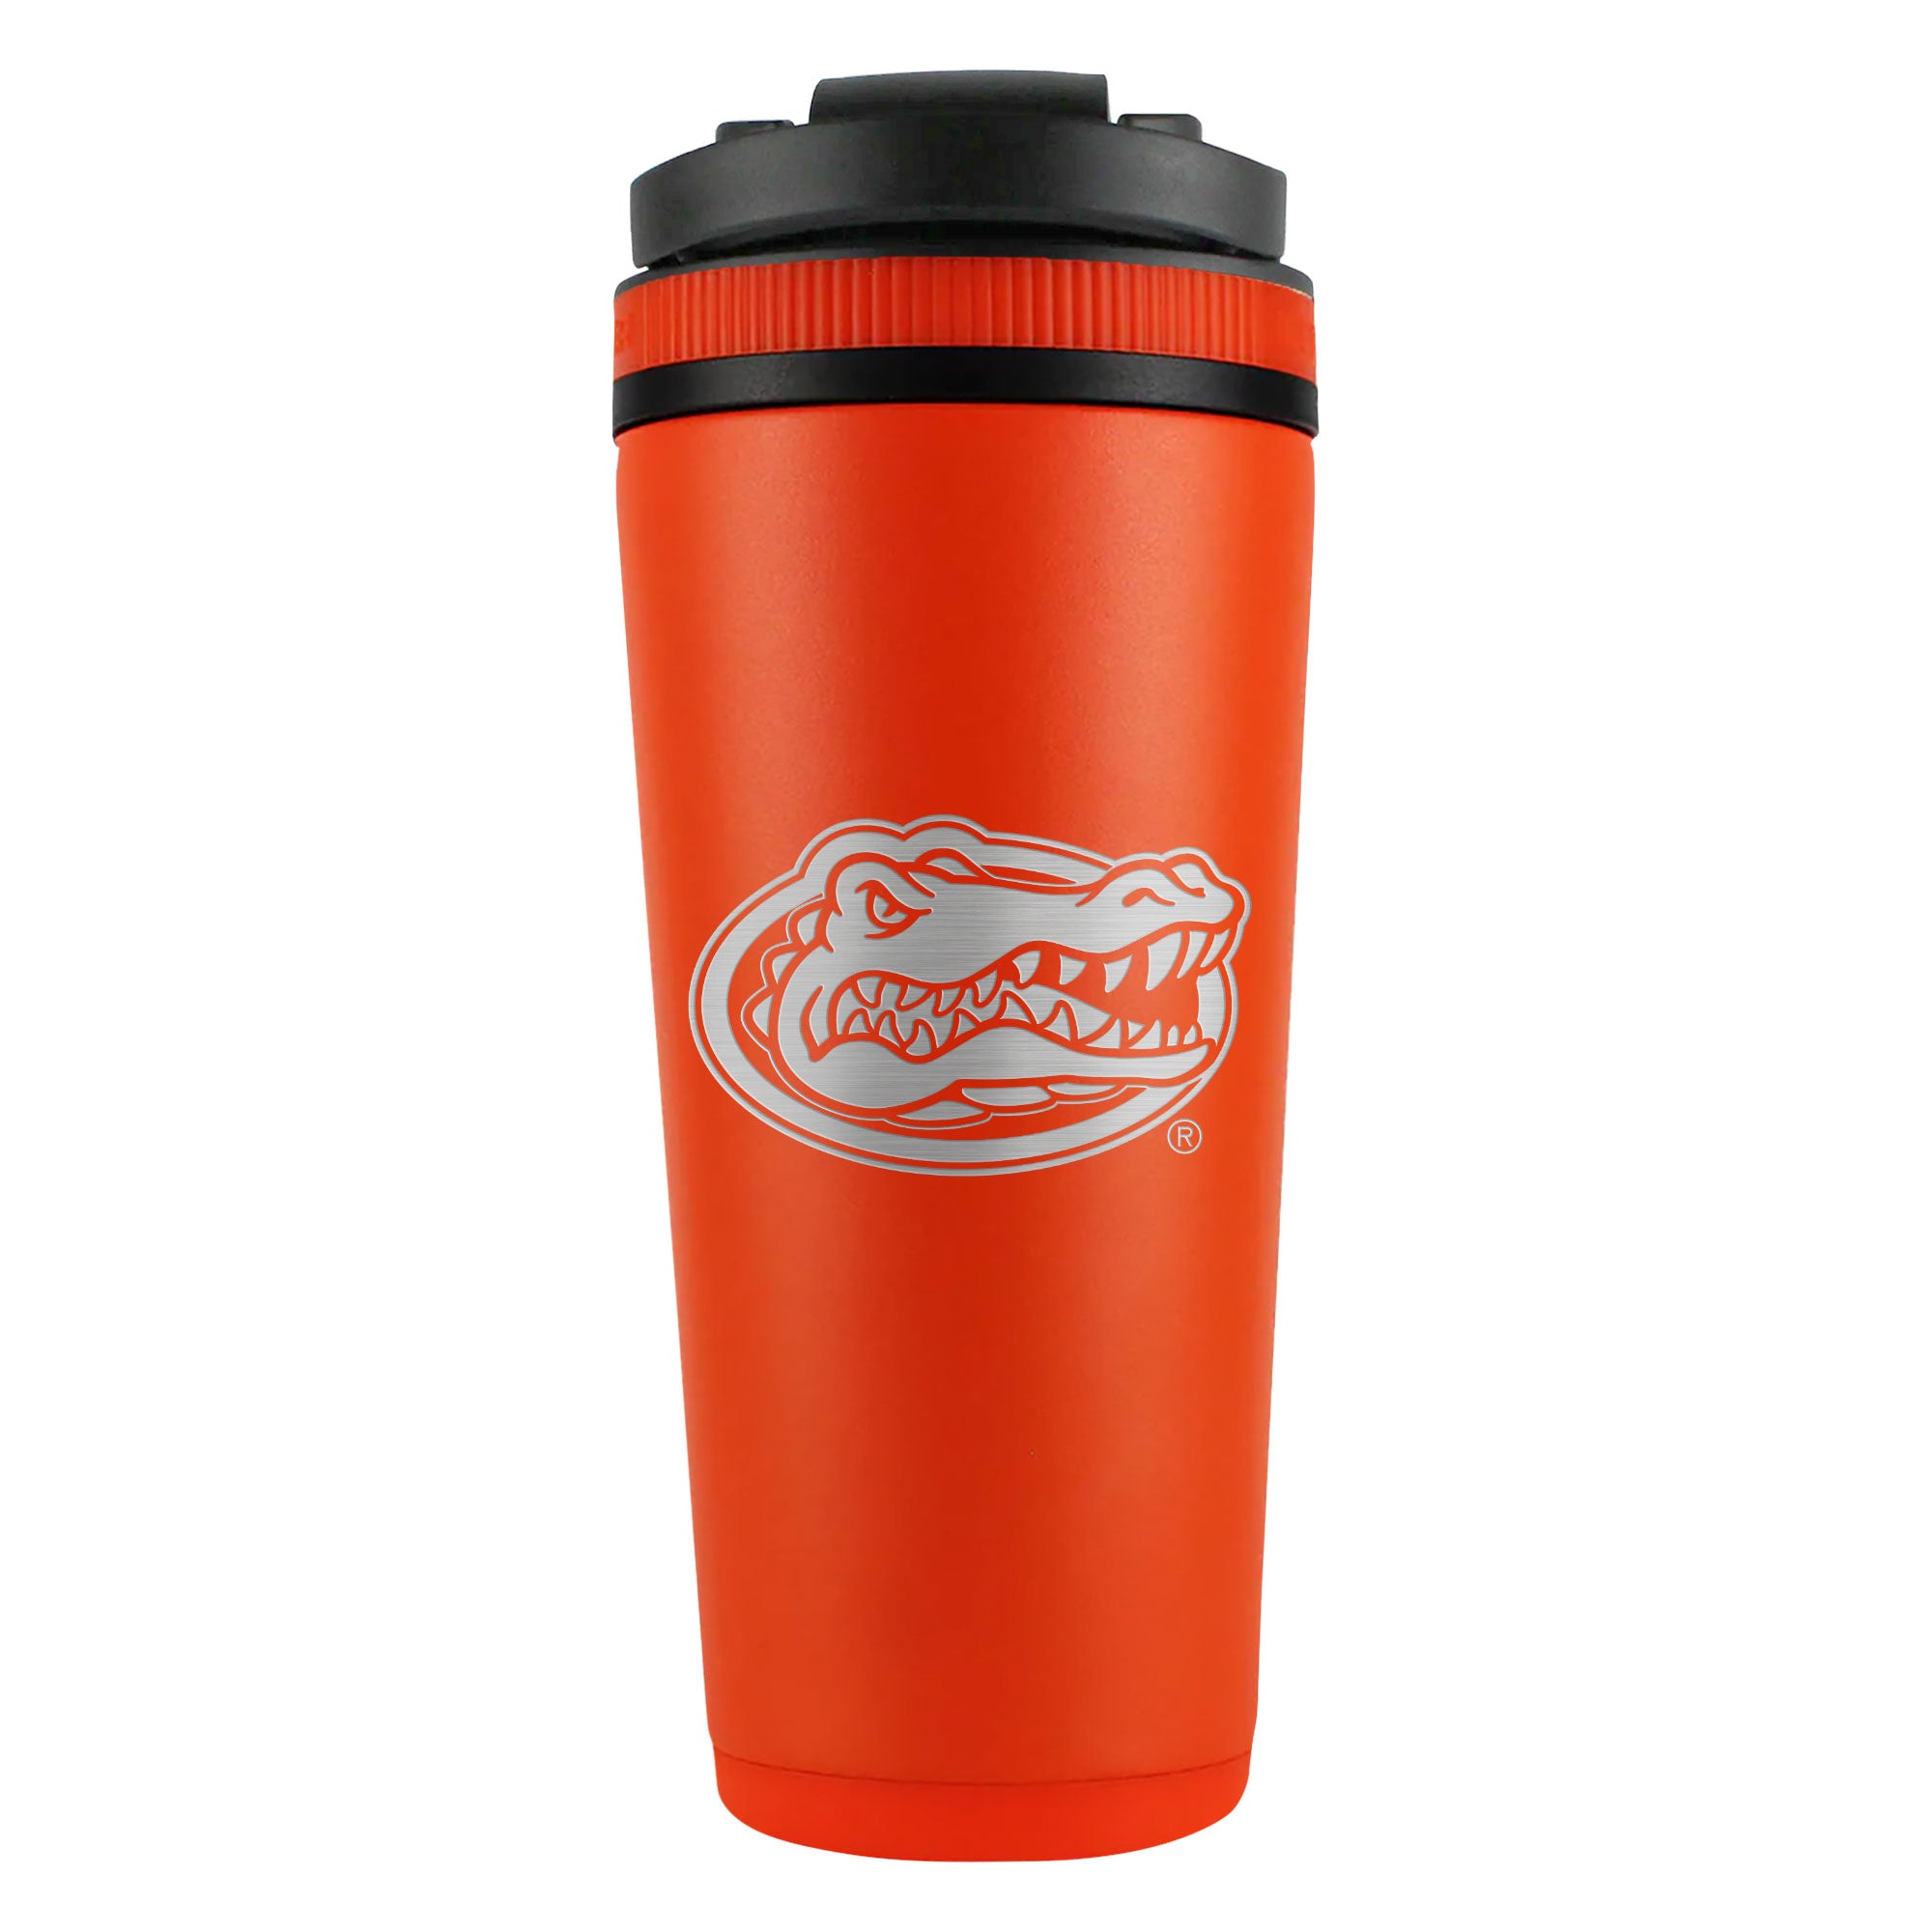 Officially Licensed University of Florida 26oz Ice Shaker